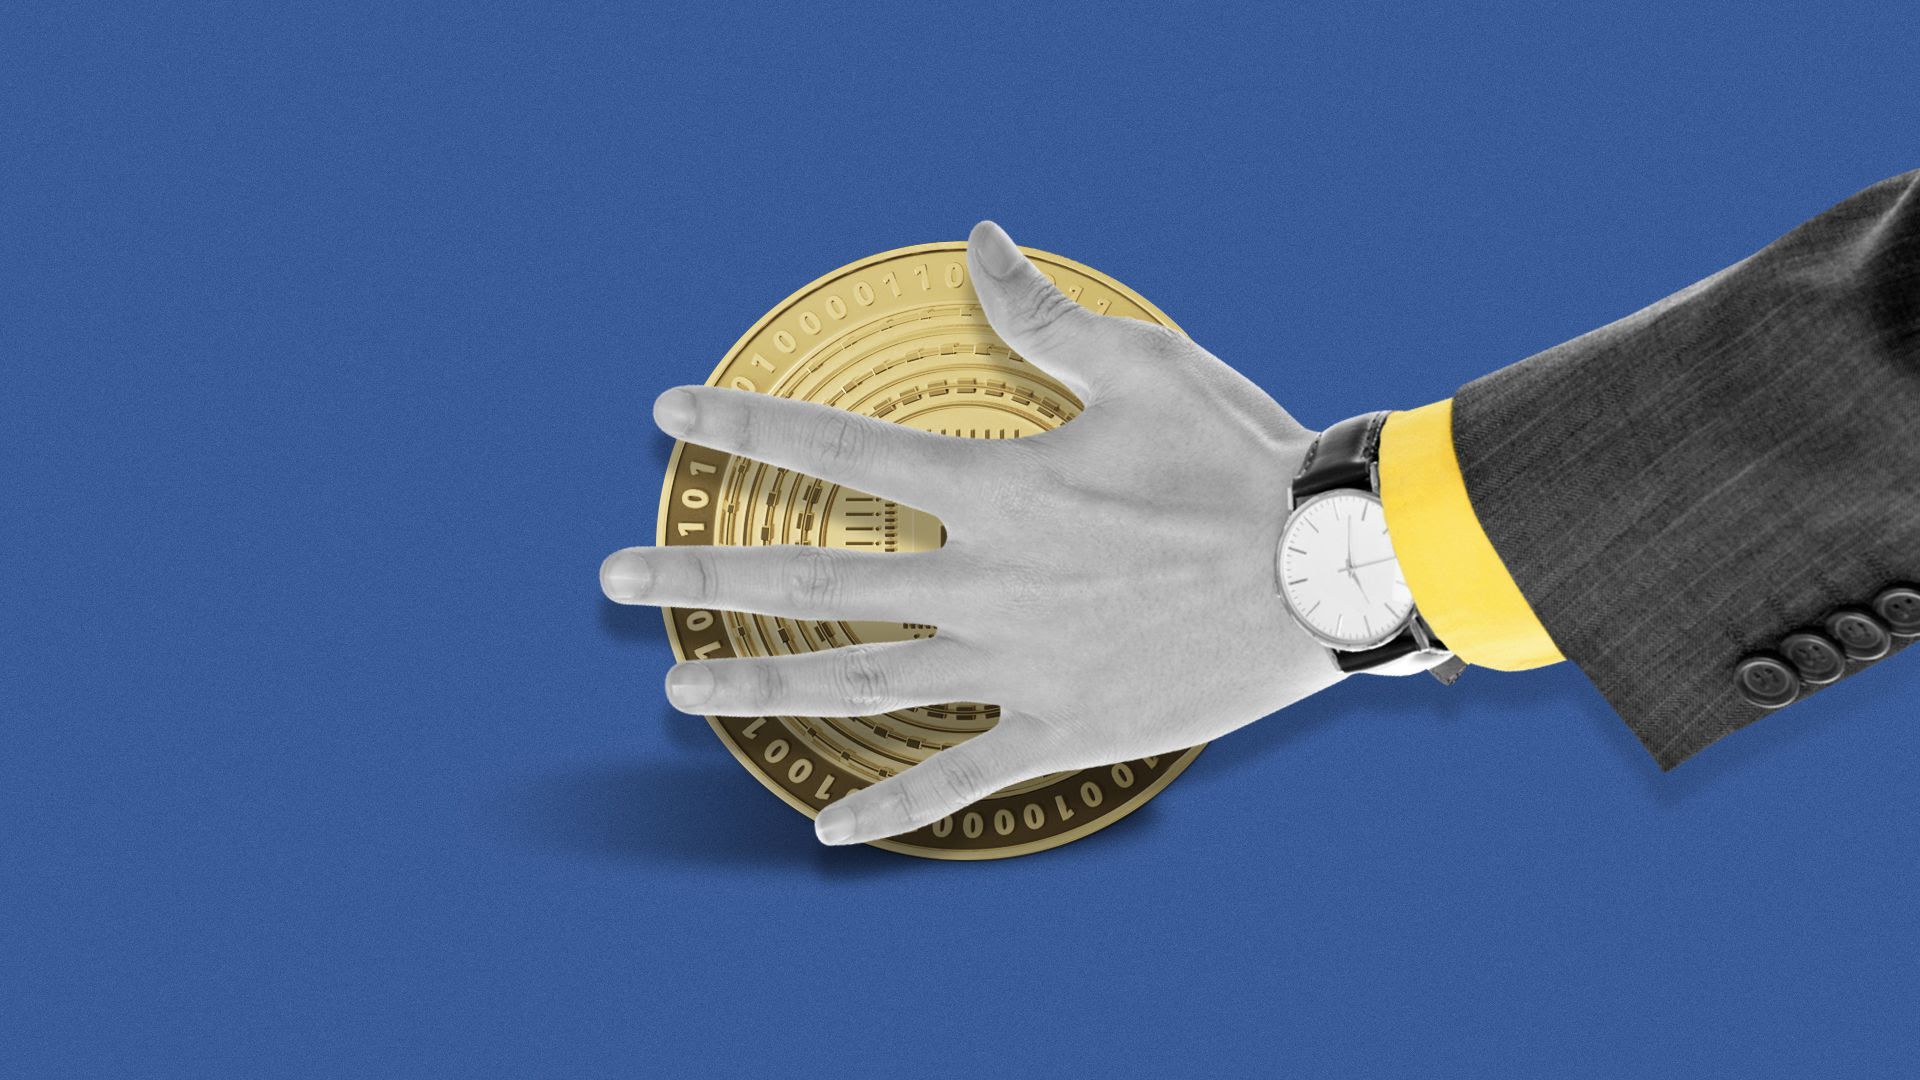 Illustration of a hand covering cryptocurrency